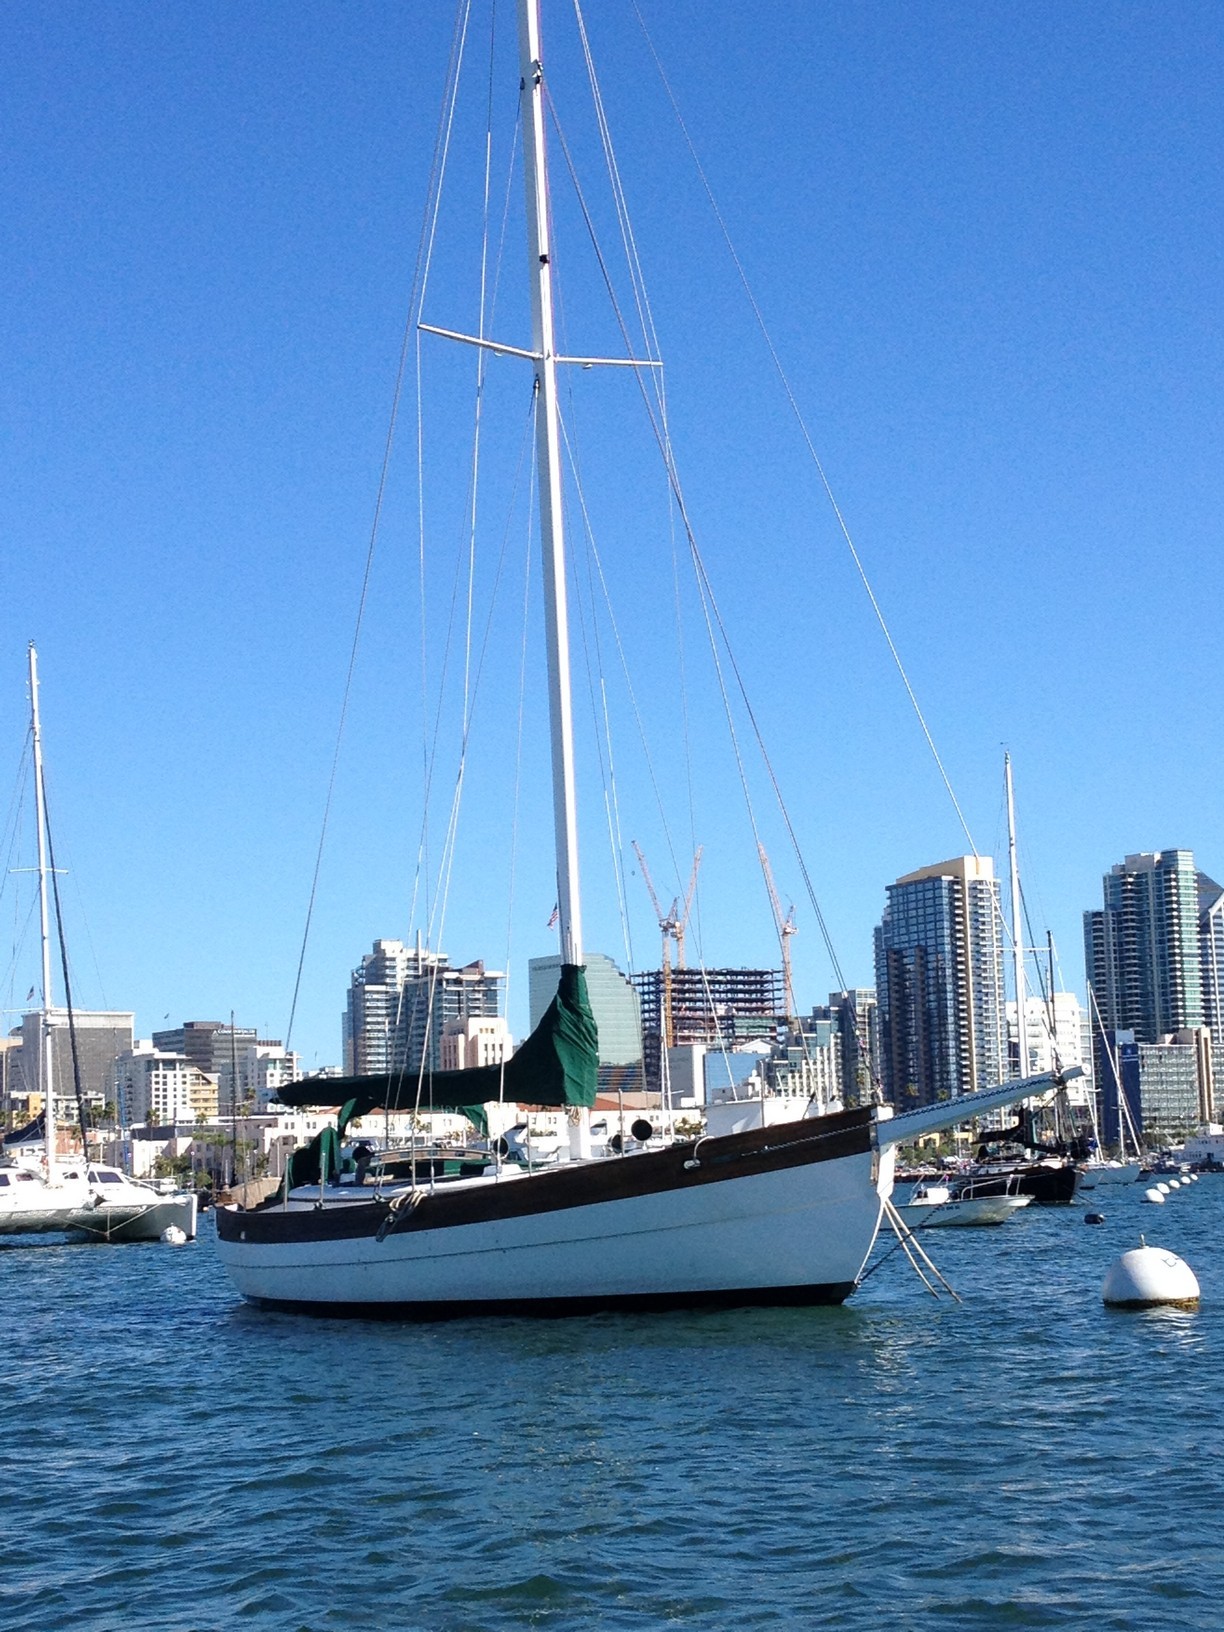 Used Sail Monohull for Sale 1982 38' Mark 2  Boat Highlights